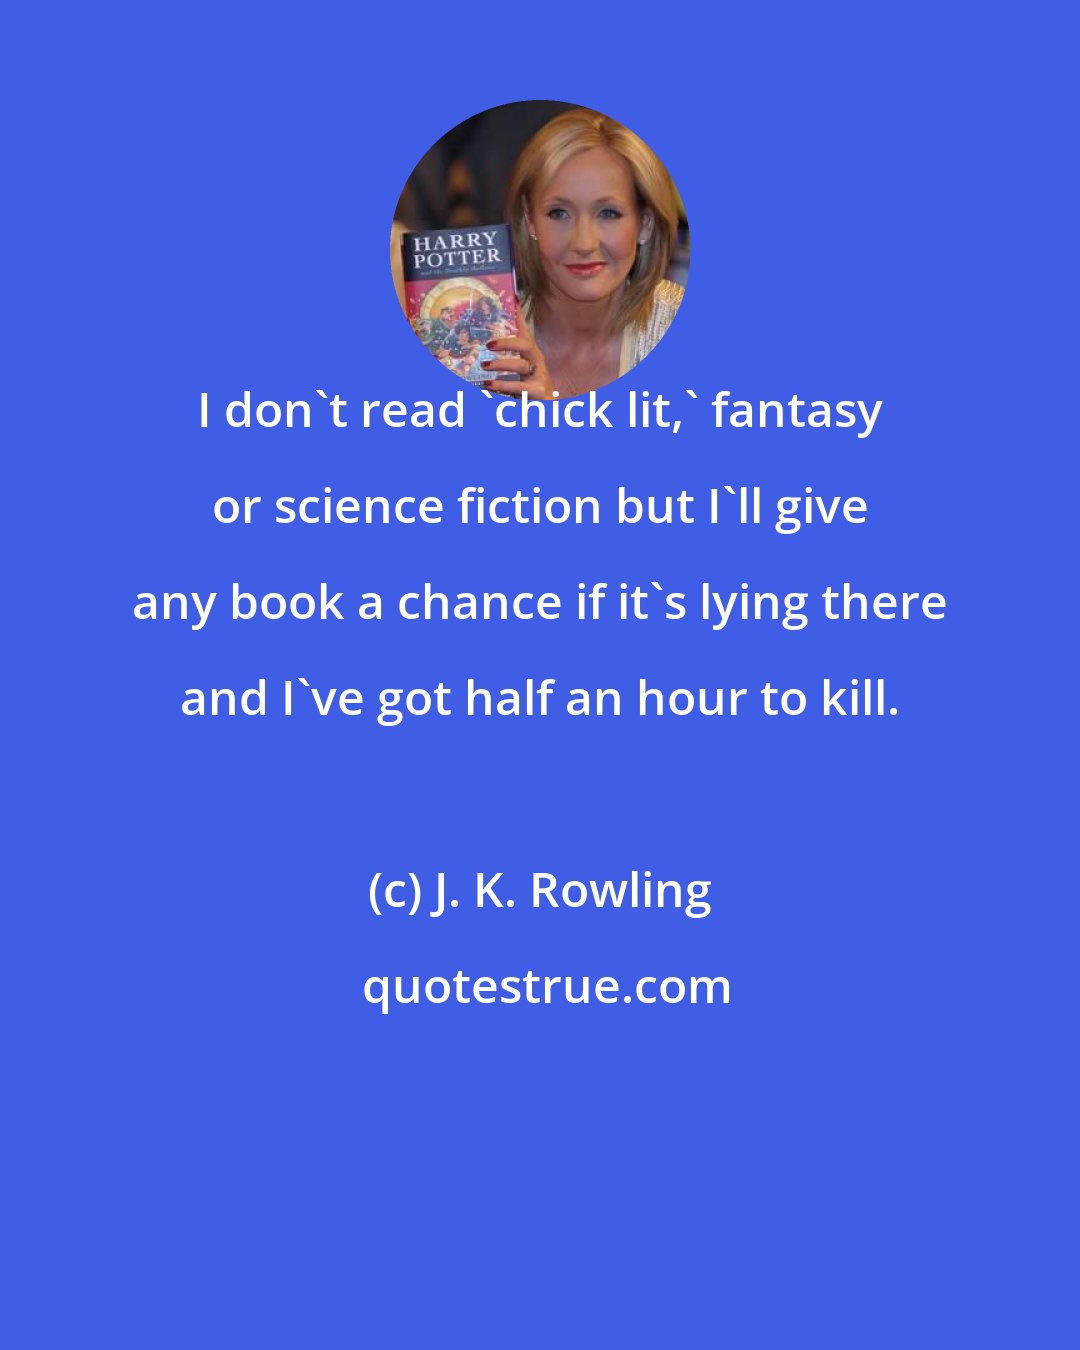 J. K. Rowling: I don't read 'chick lit,' fantasy or science fiction but I'll give any book a chance if it's lying there and I've got half an hour to kill.